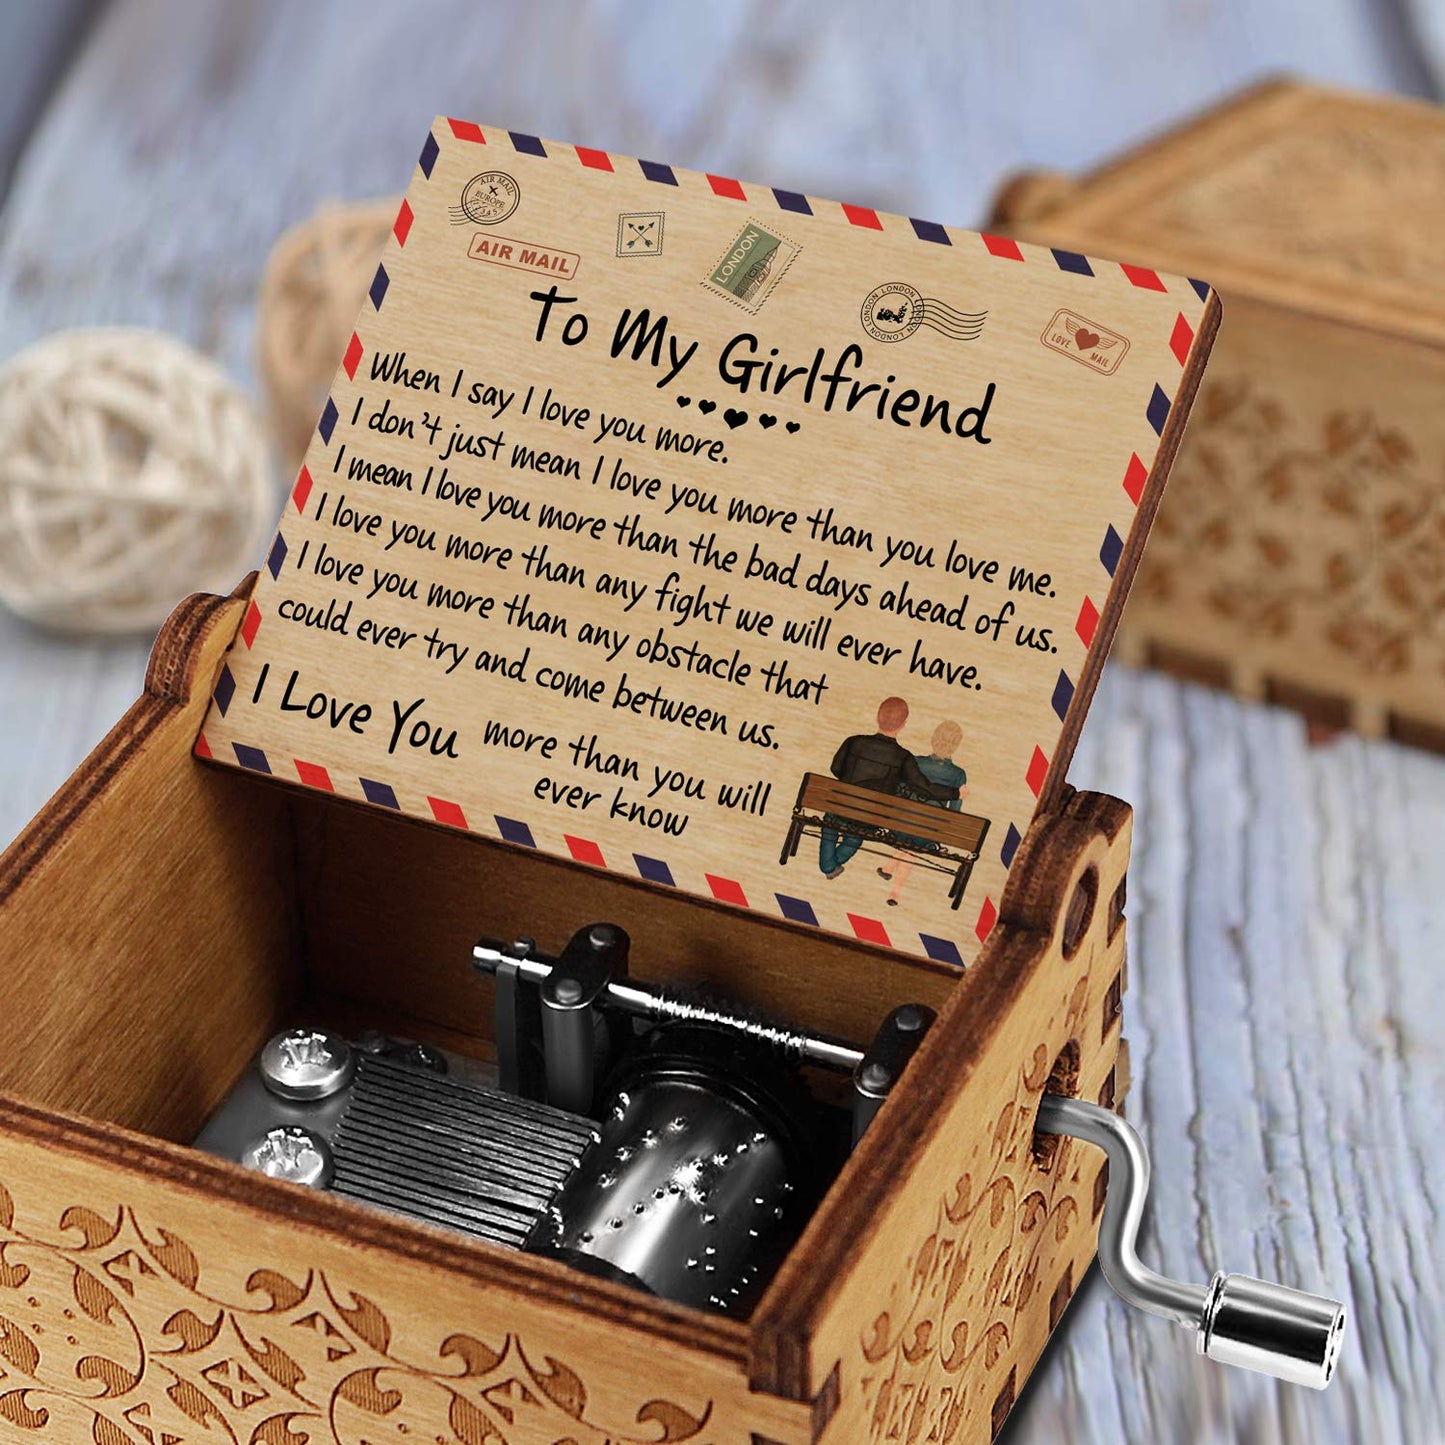 To My Girlfriend-I love you more then the bad days ahend of us-Music Box